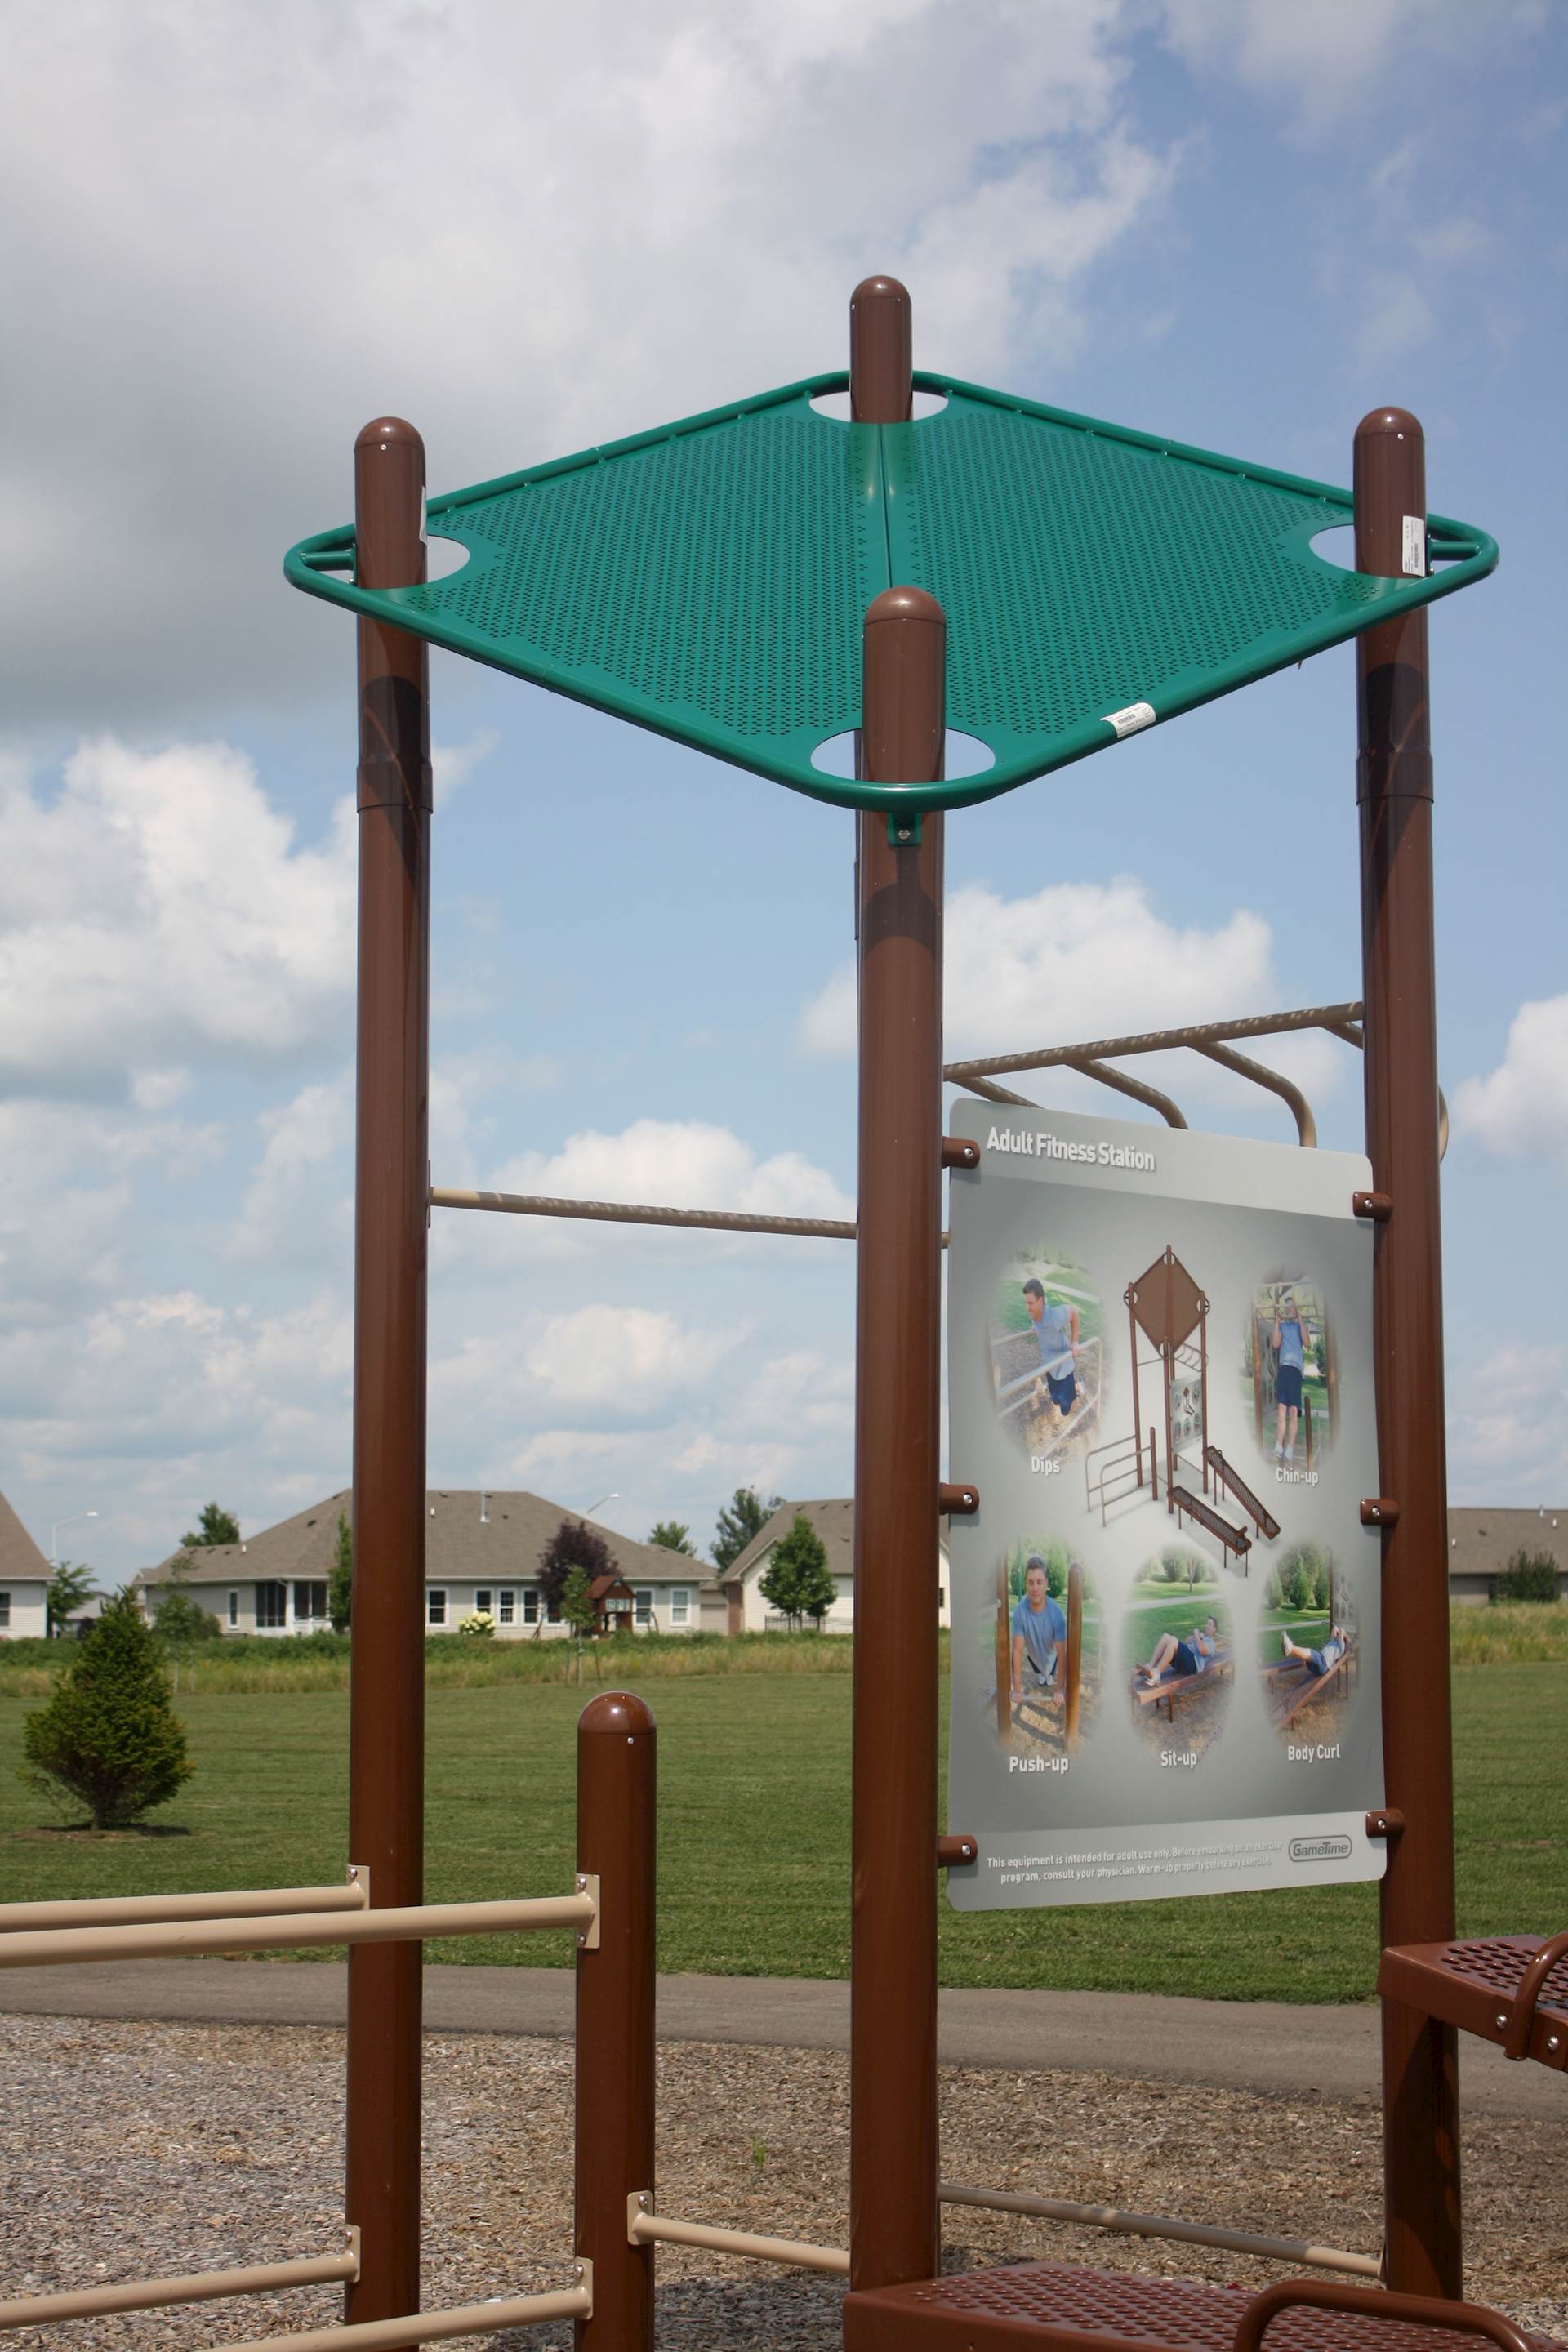 centennial park outdoor playground and adult fitness equipment